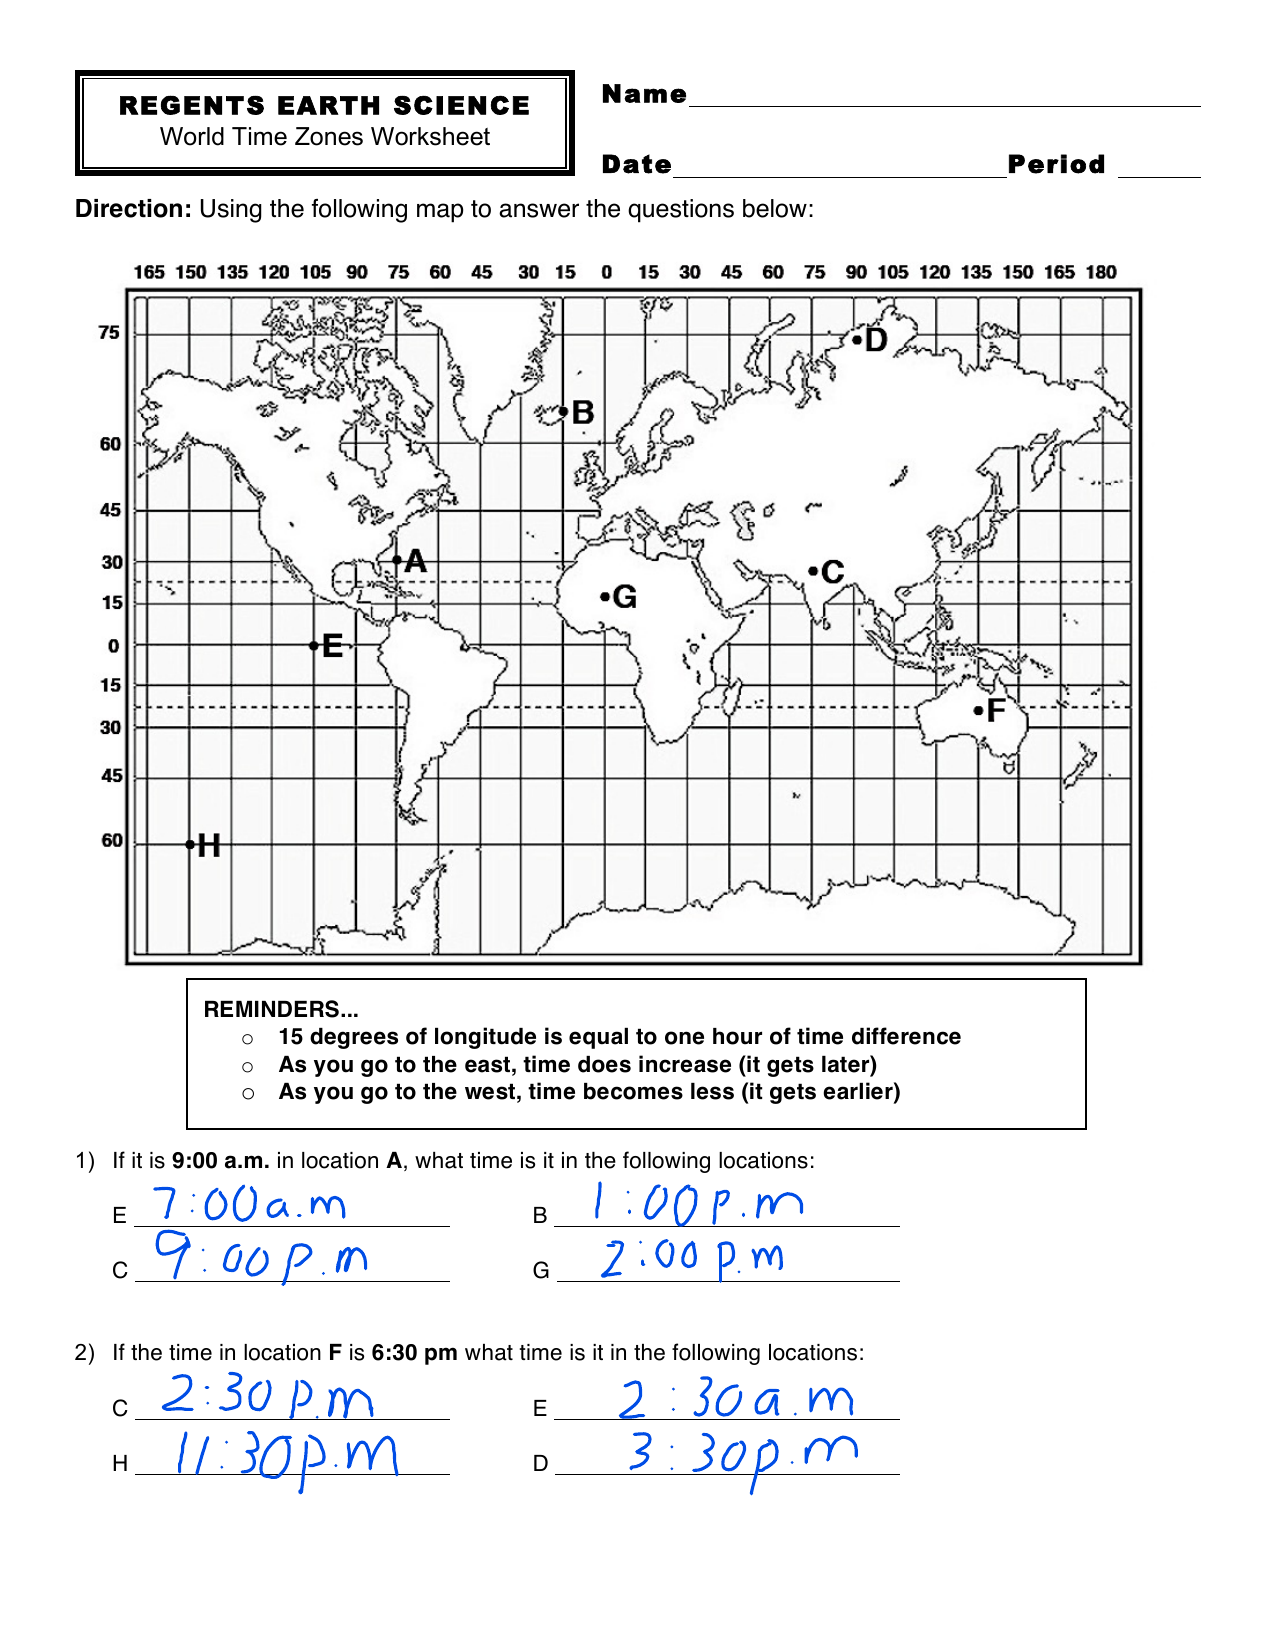 24 - Time Zones Worksheet With Science World Worksheet Answers